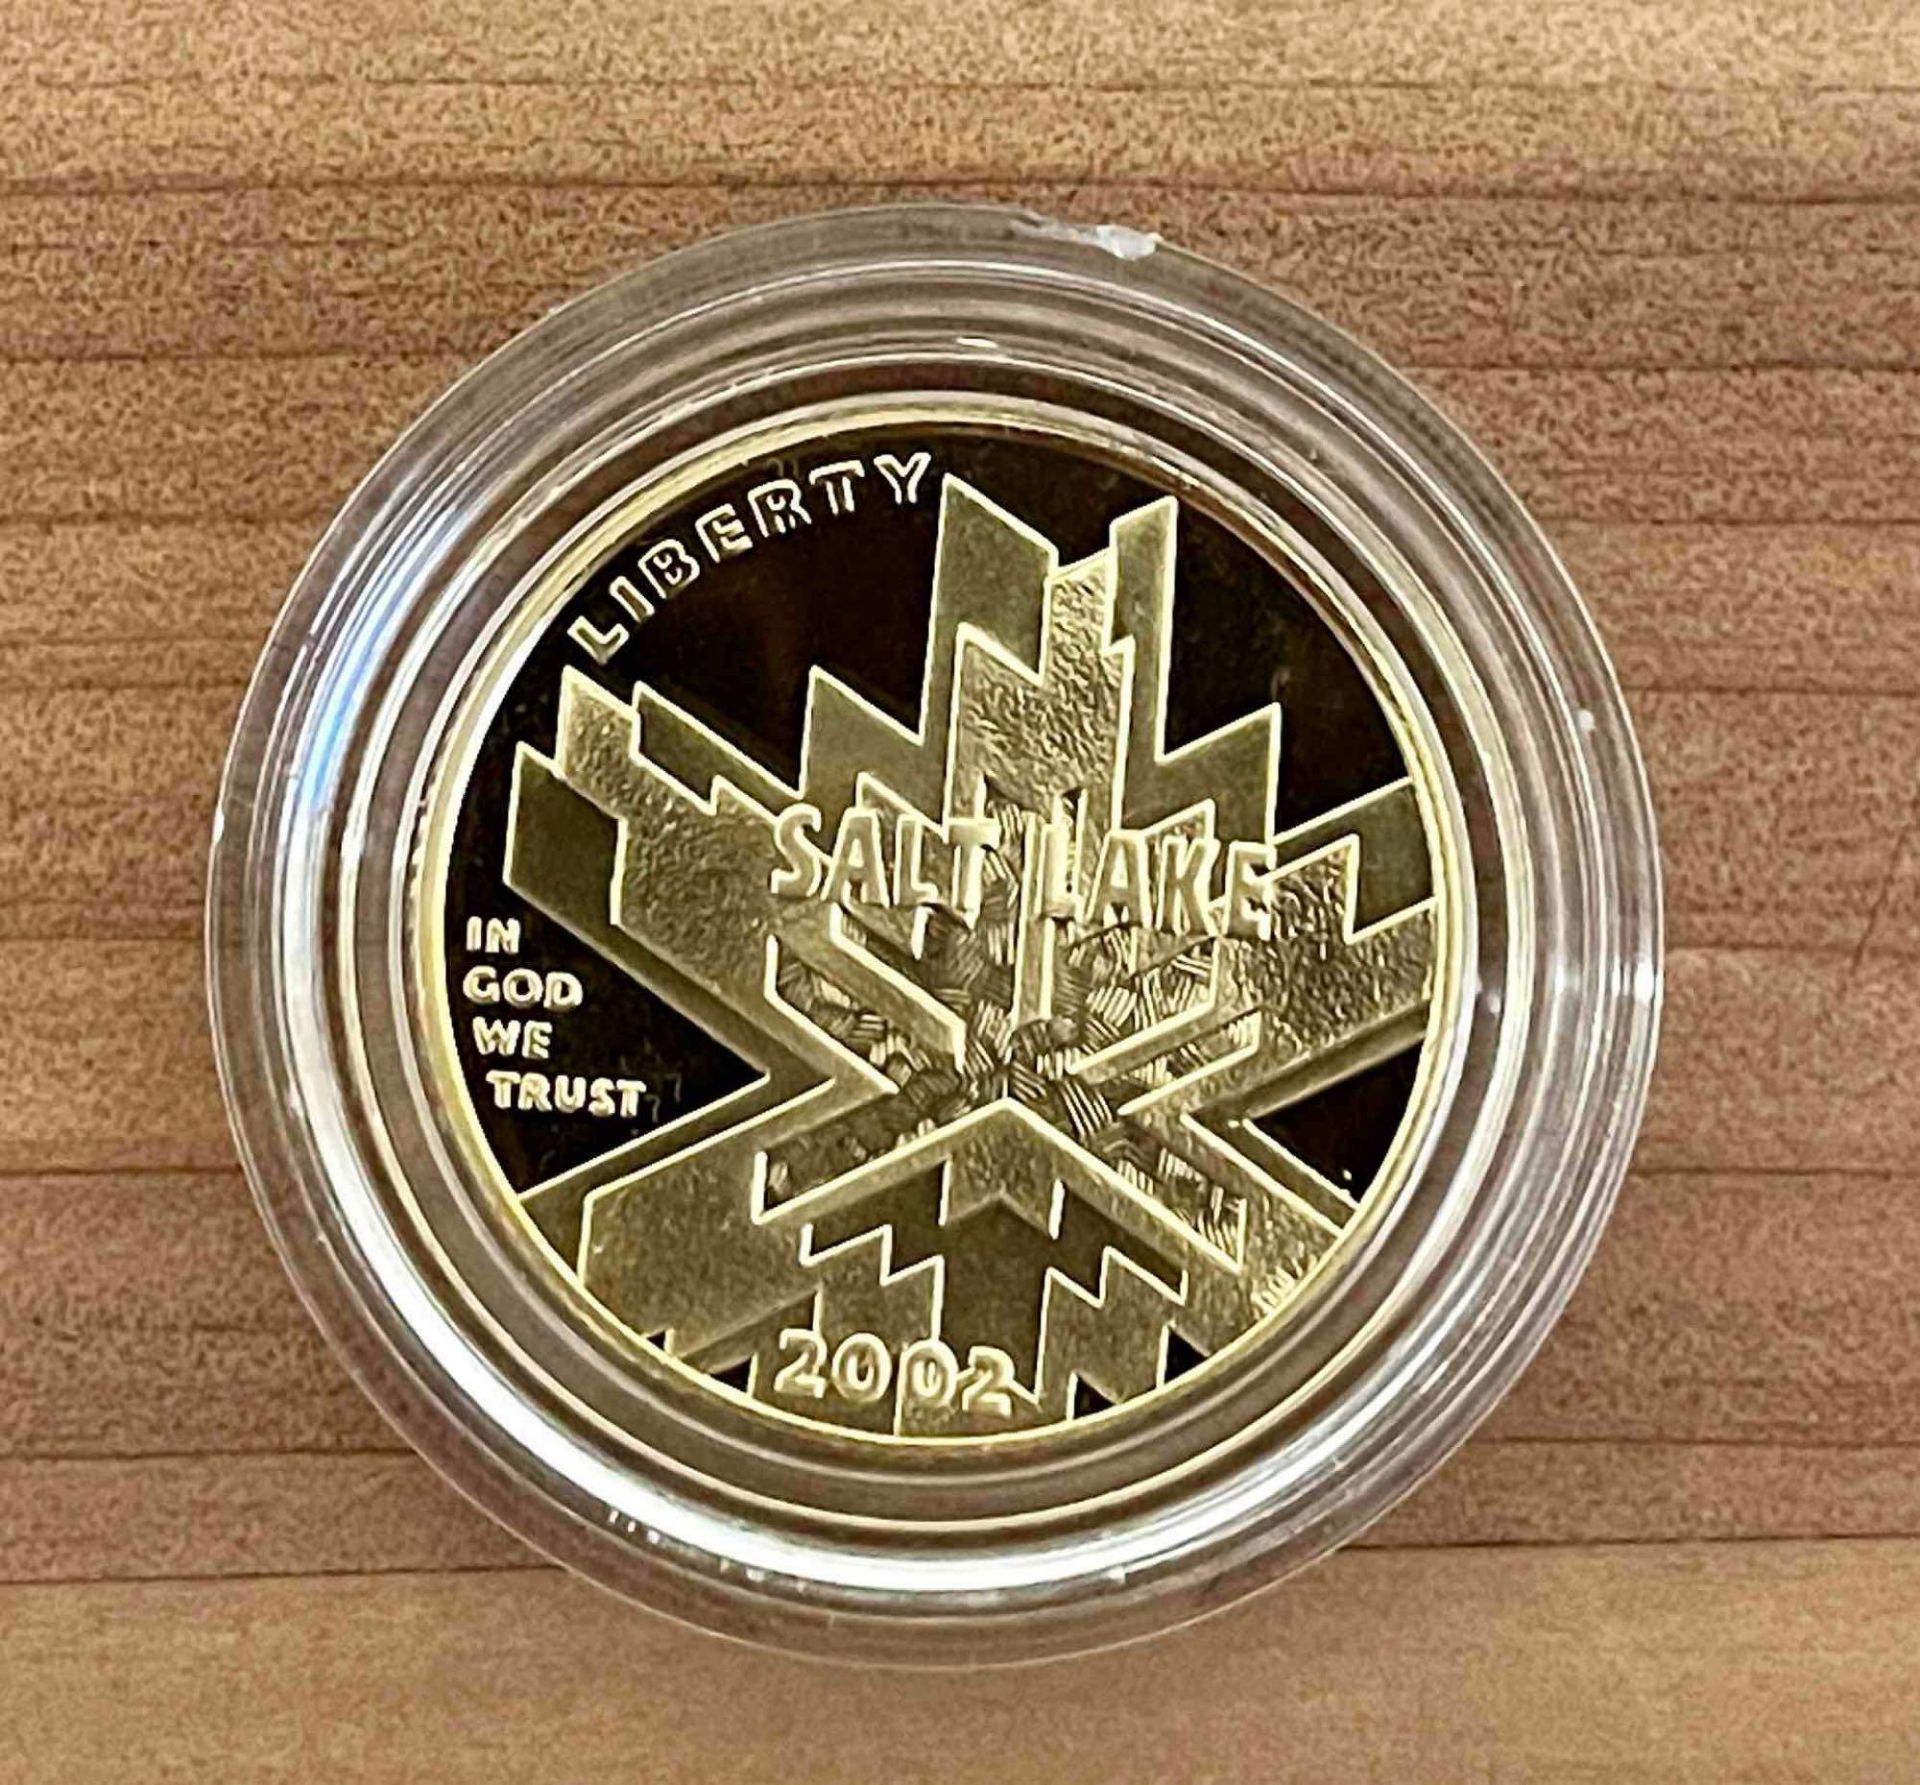 2002 W & P Salt Lake Olympic Winter Games Commemorative Two-Coin Set $5 Gold & $1 Silver Proofs - Image 7 of 11